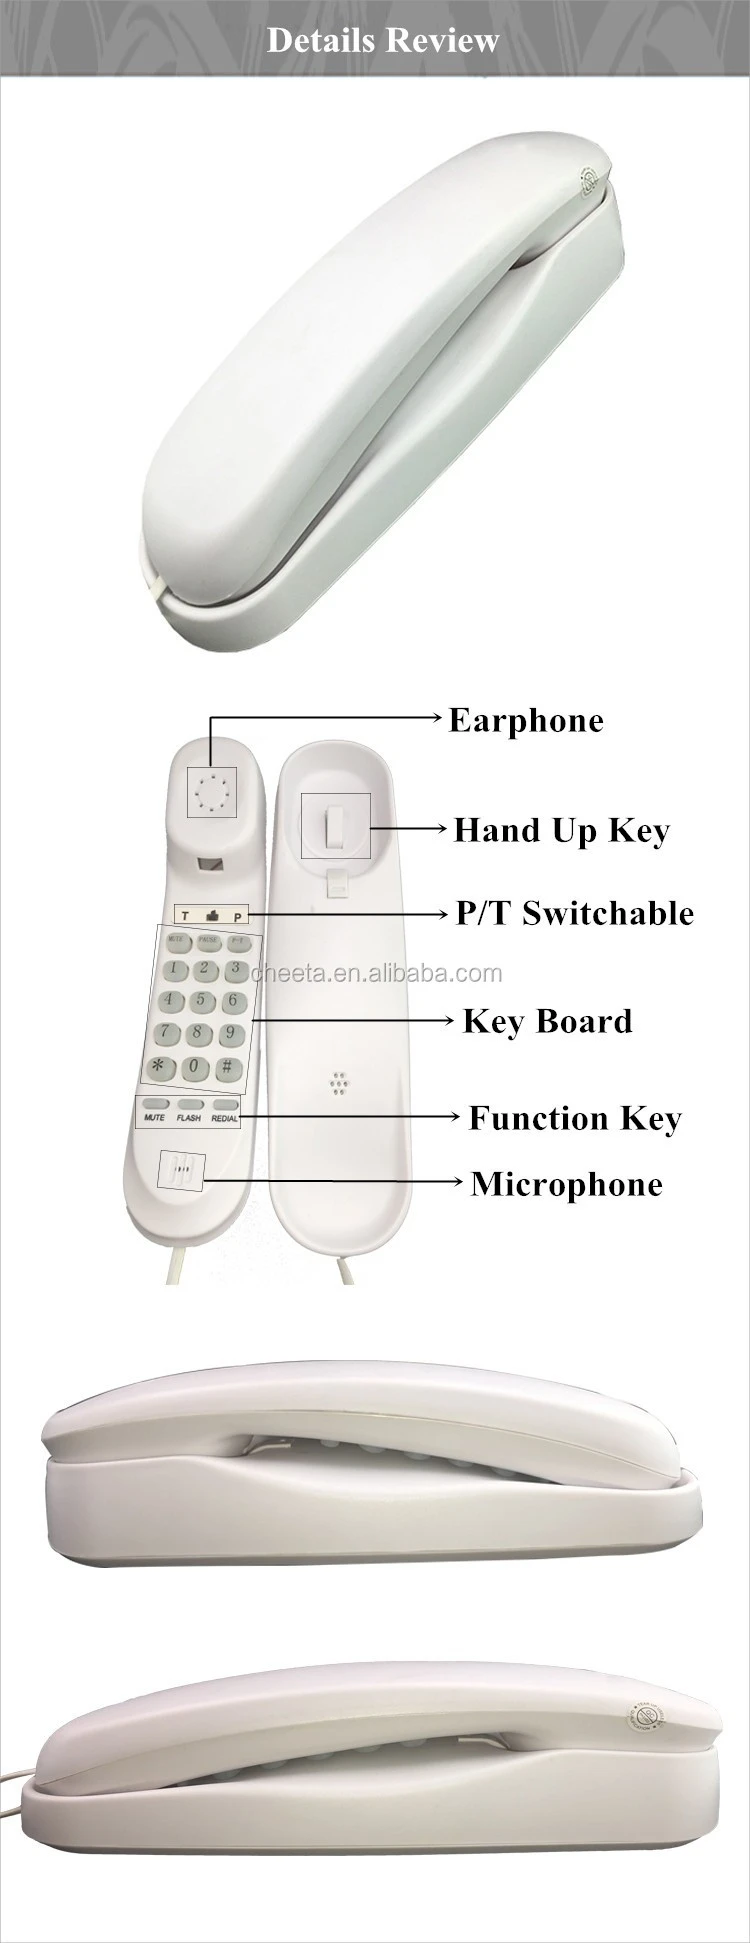 Latest offer for wall mounted phone, factory price,Shenzhen Cheeta Technology Co., Ltd. is a professional Trimline Telephone manufacturer in China . Provide wholesale and OEM of Trimline Telephone.